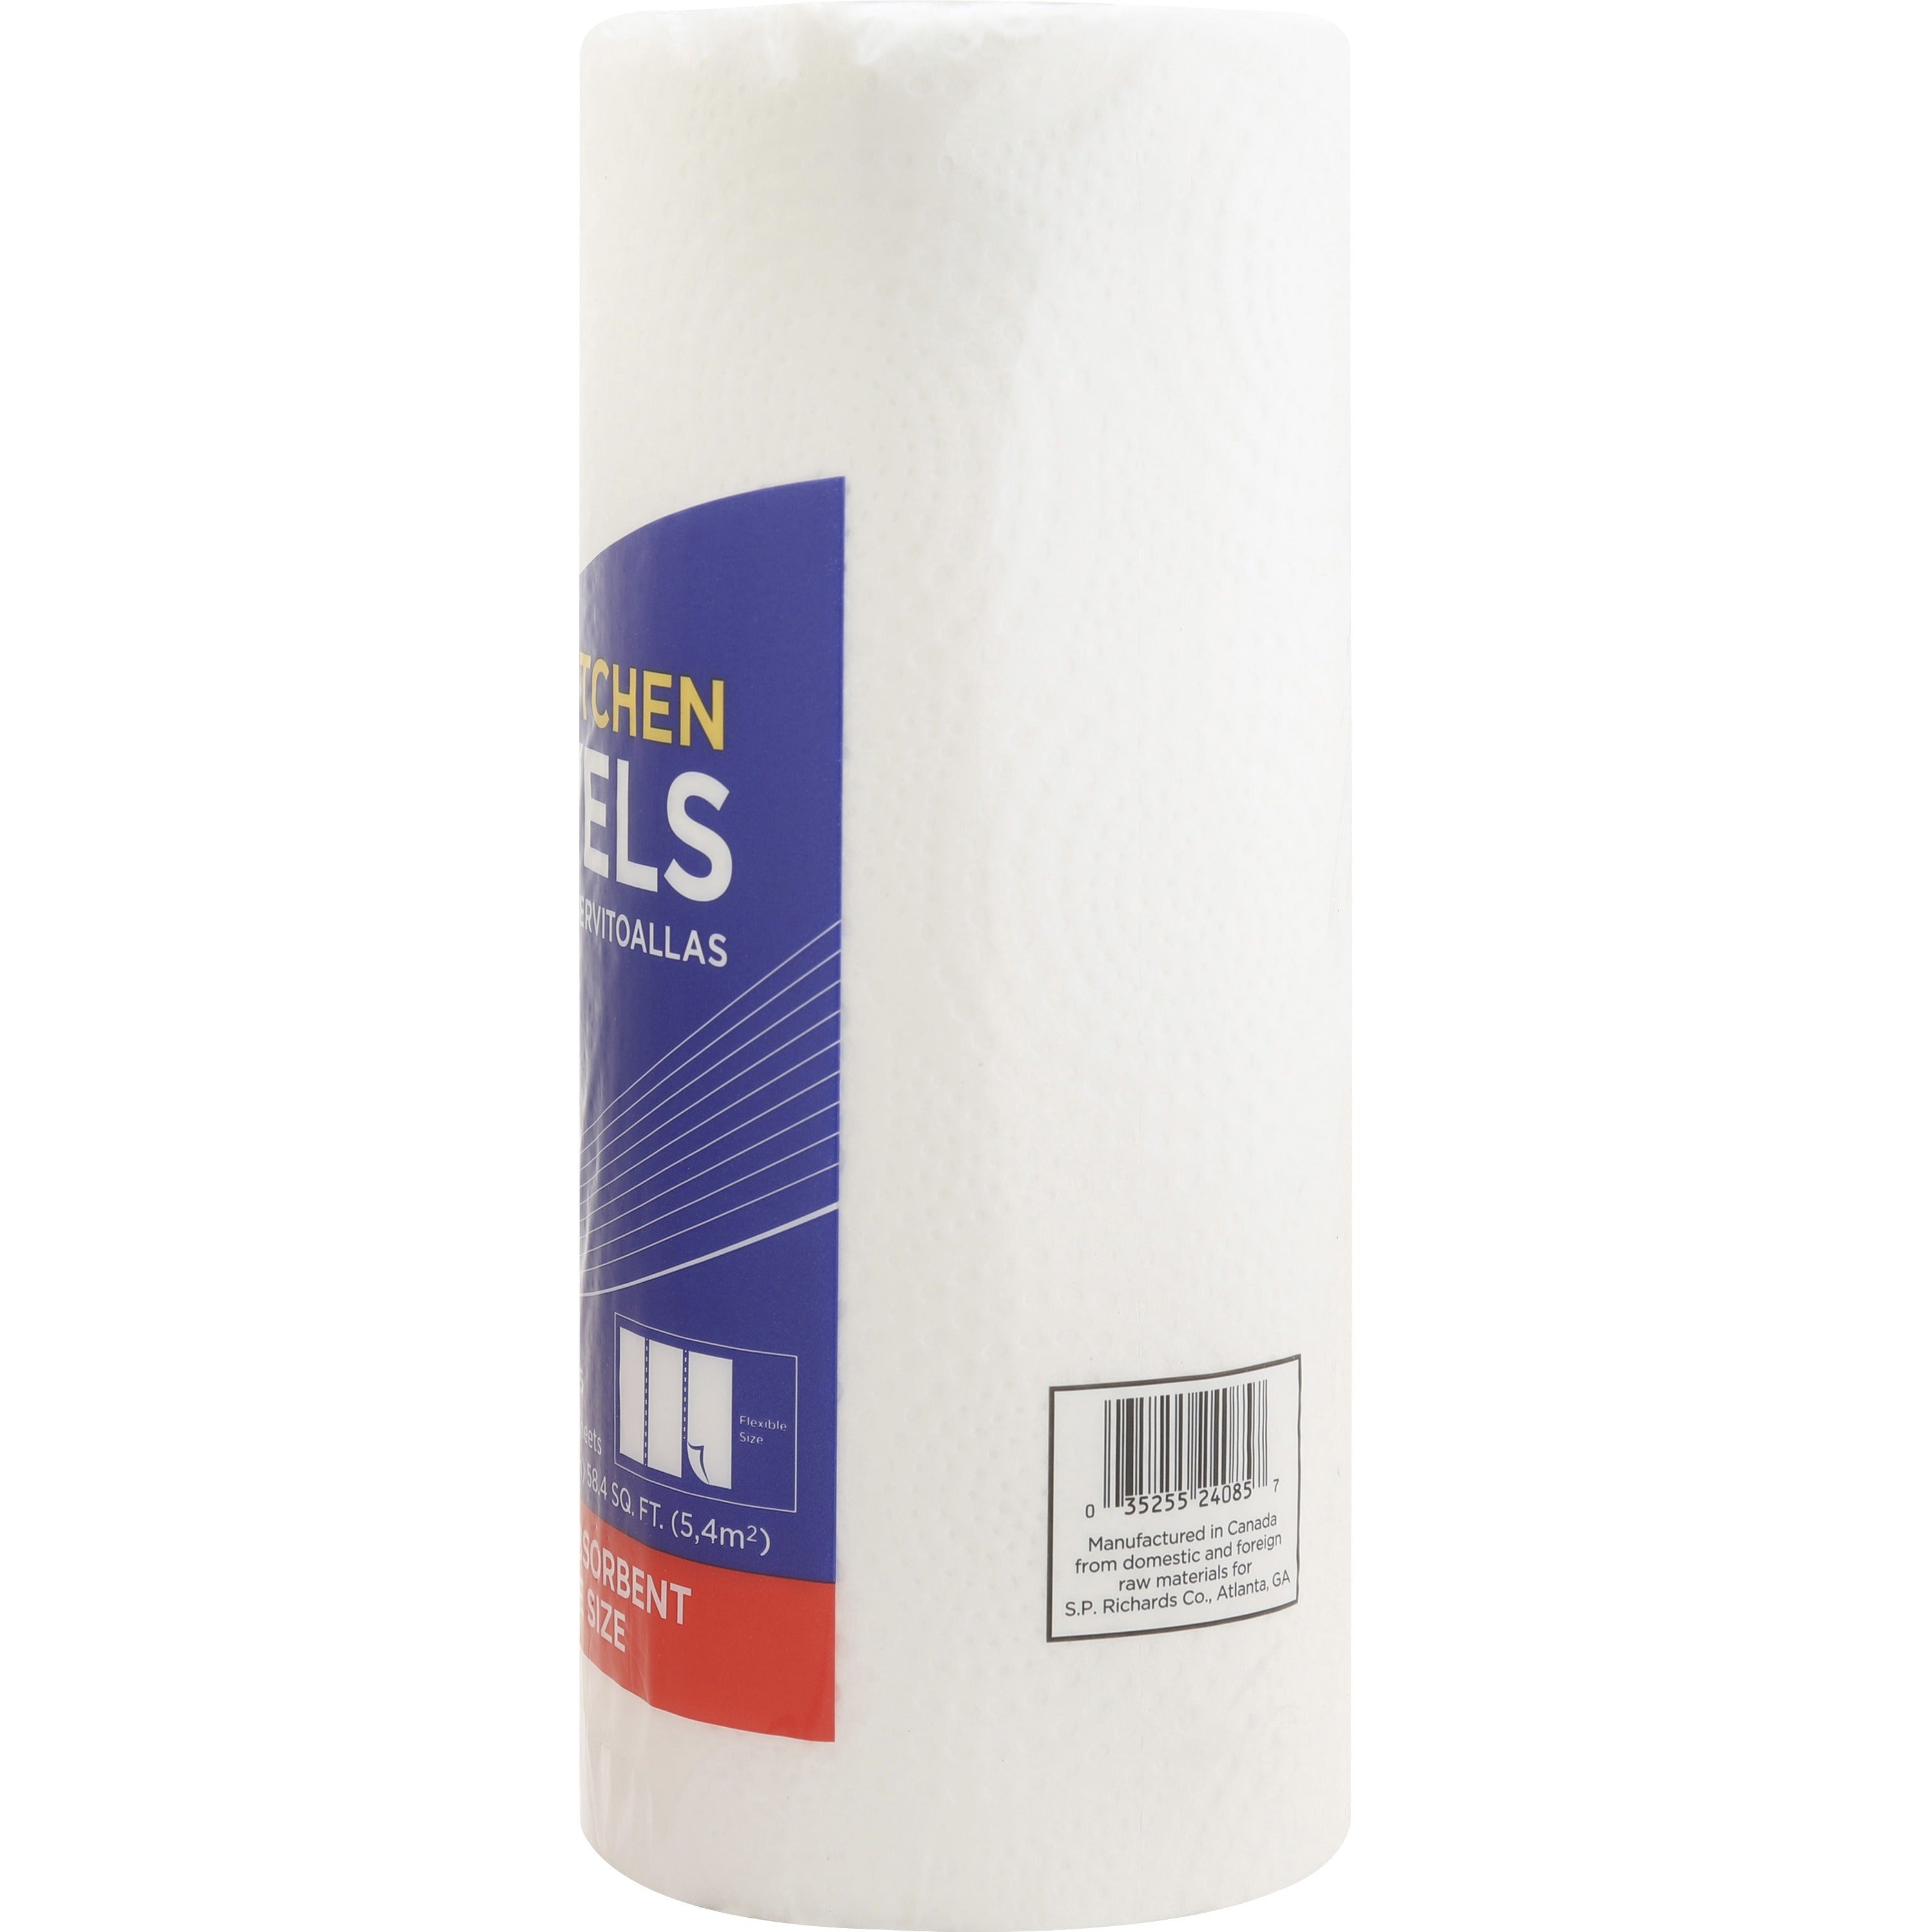 genuine-joe-kitchen-roll-flexible-size-towels-2-ply-163-core-white-paper-flexible-perforated-absorbent-soft-for-kitchen-multipurpose-breakroom-30-carton_gjo24085 - 5